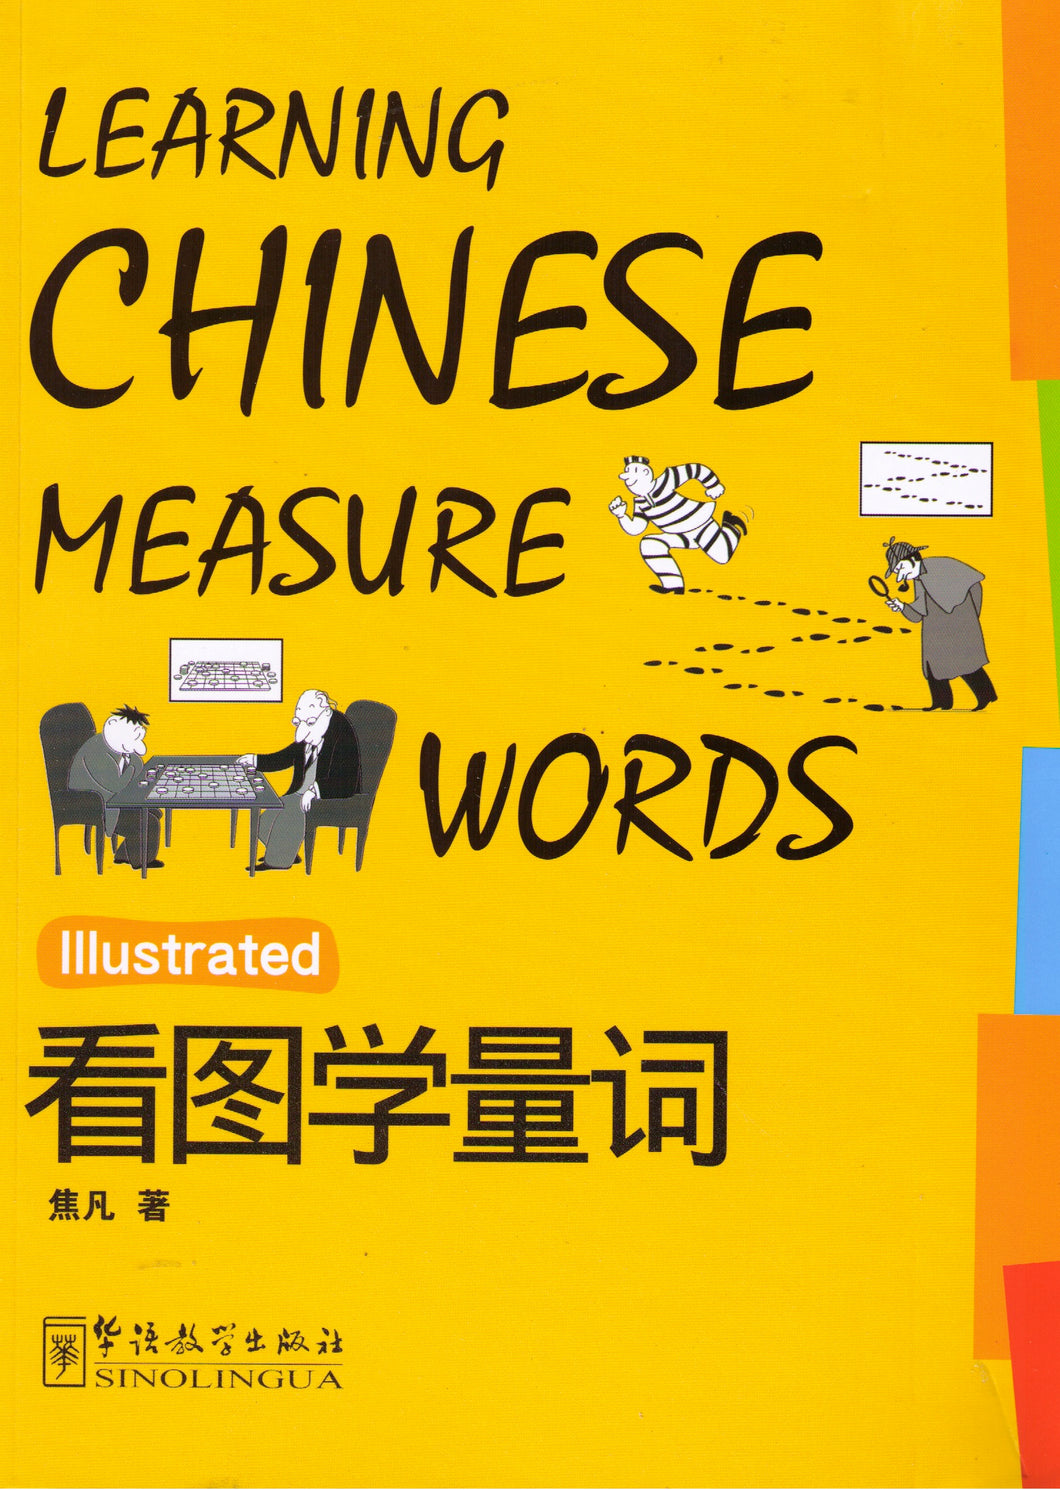 Learning Chinese Measure Words 看图学量词